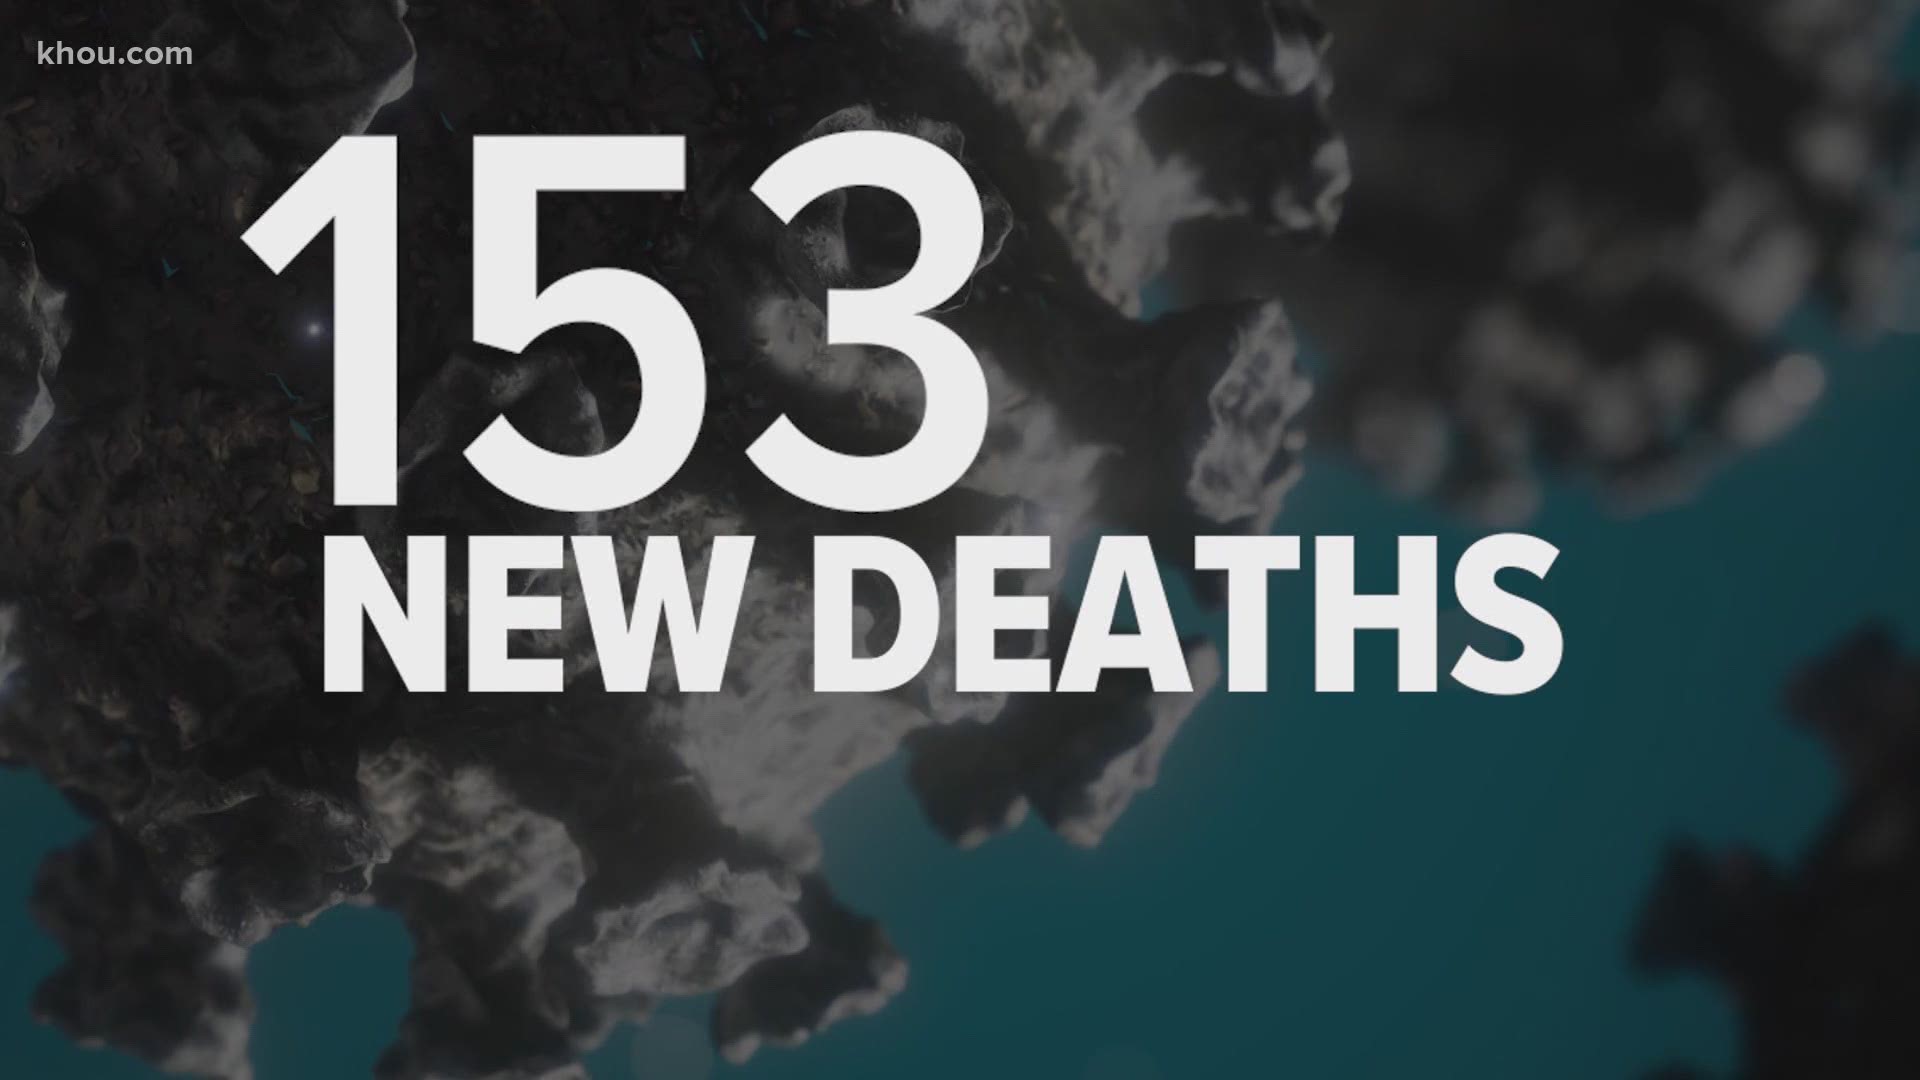 In Houston, 15 of the 21 people whose deaths were reported over the weekend were Hispanic.